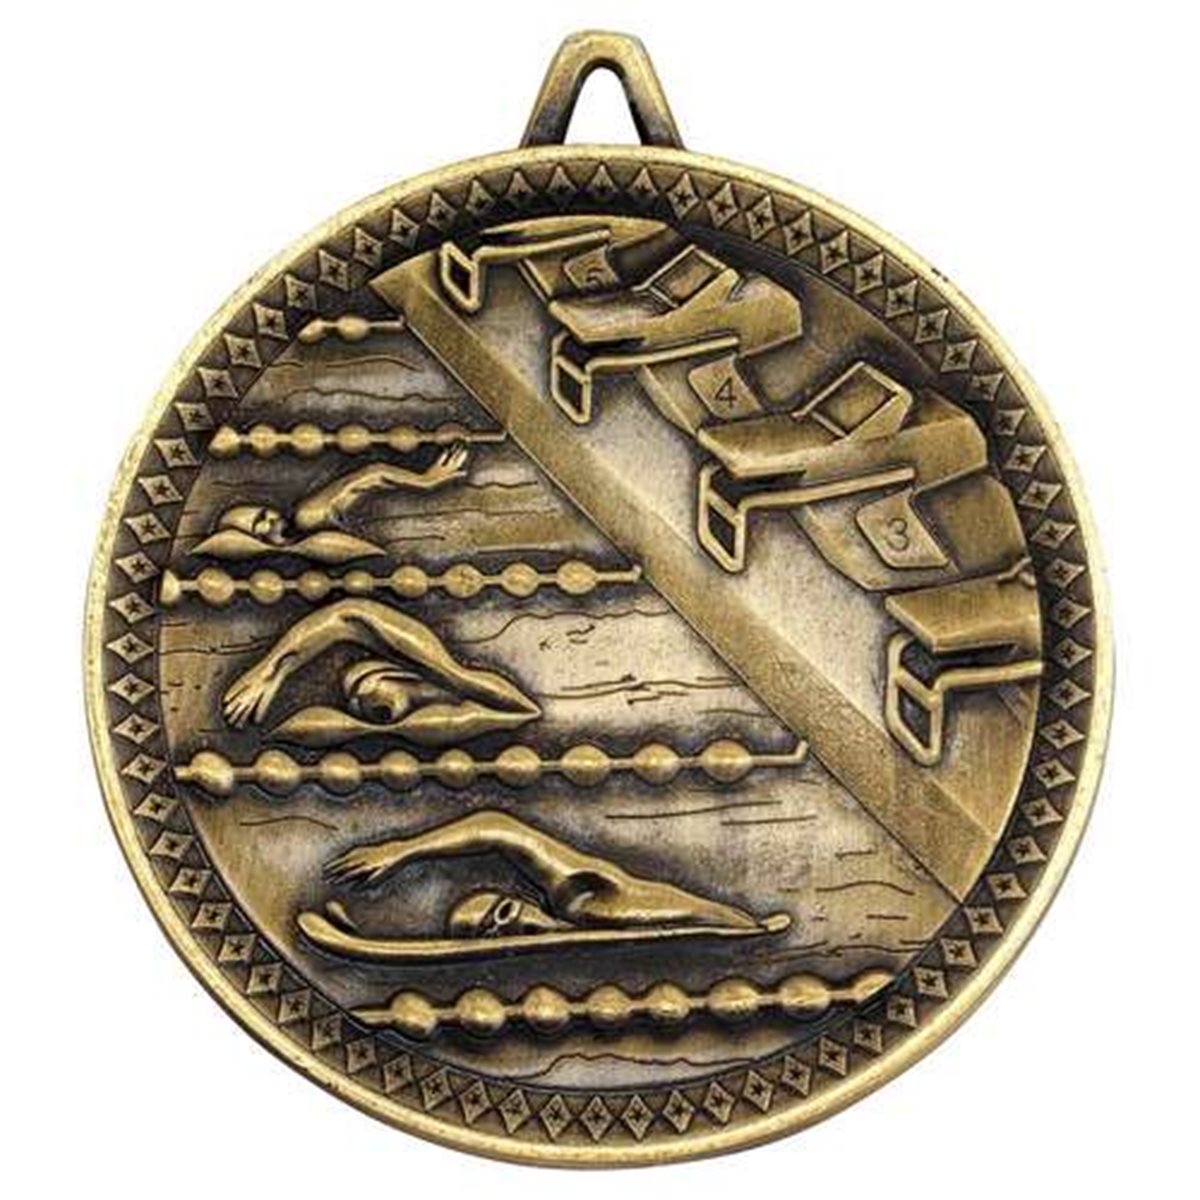 60mm Deluxe Swimming Medal DM09 in Gold, Silver & Bronze